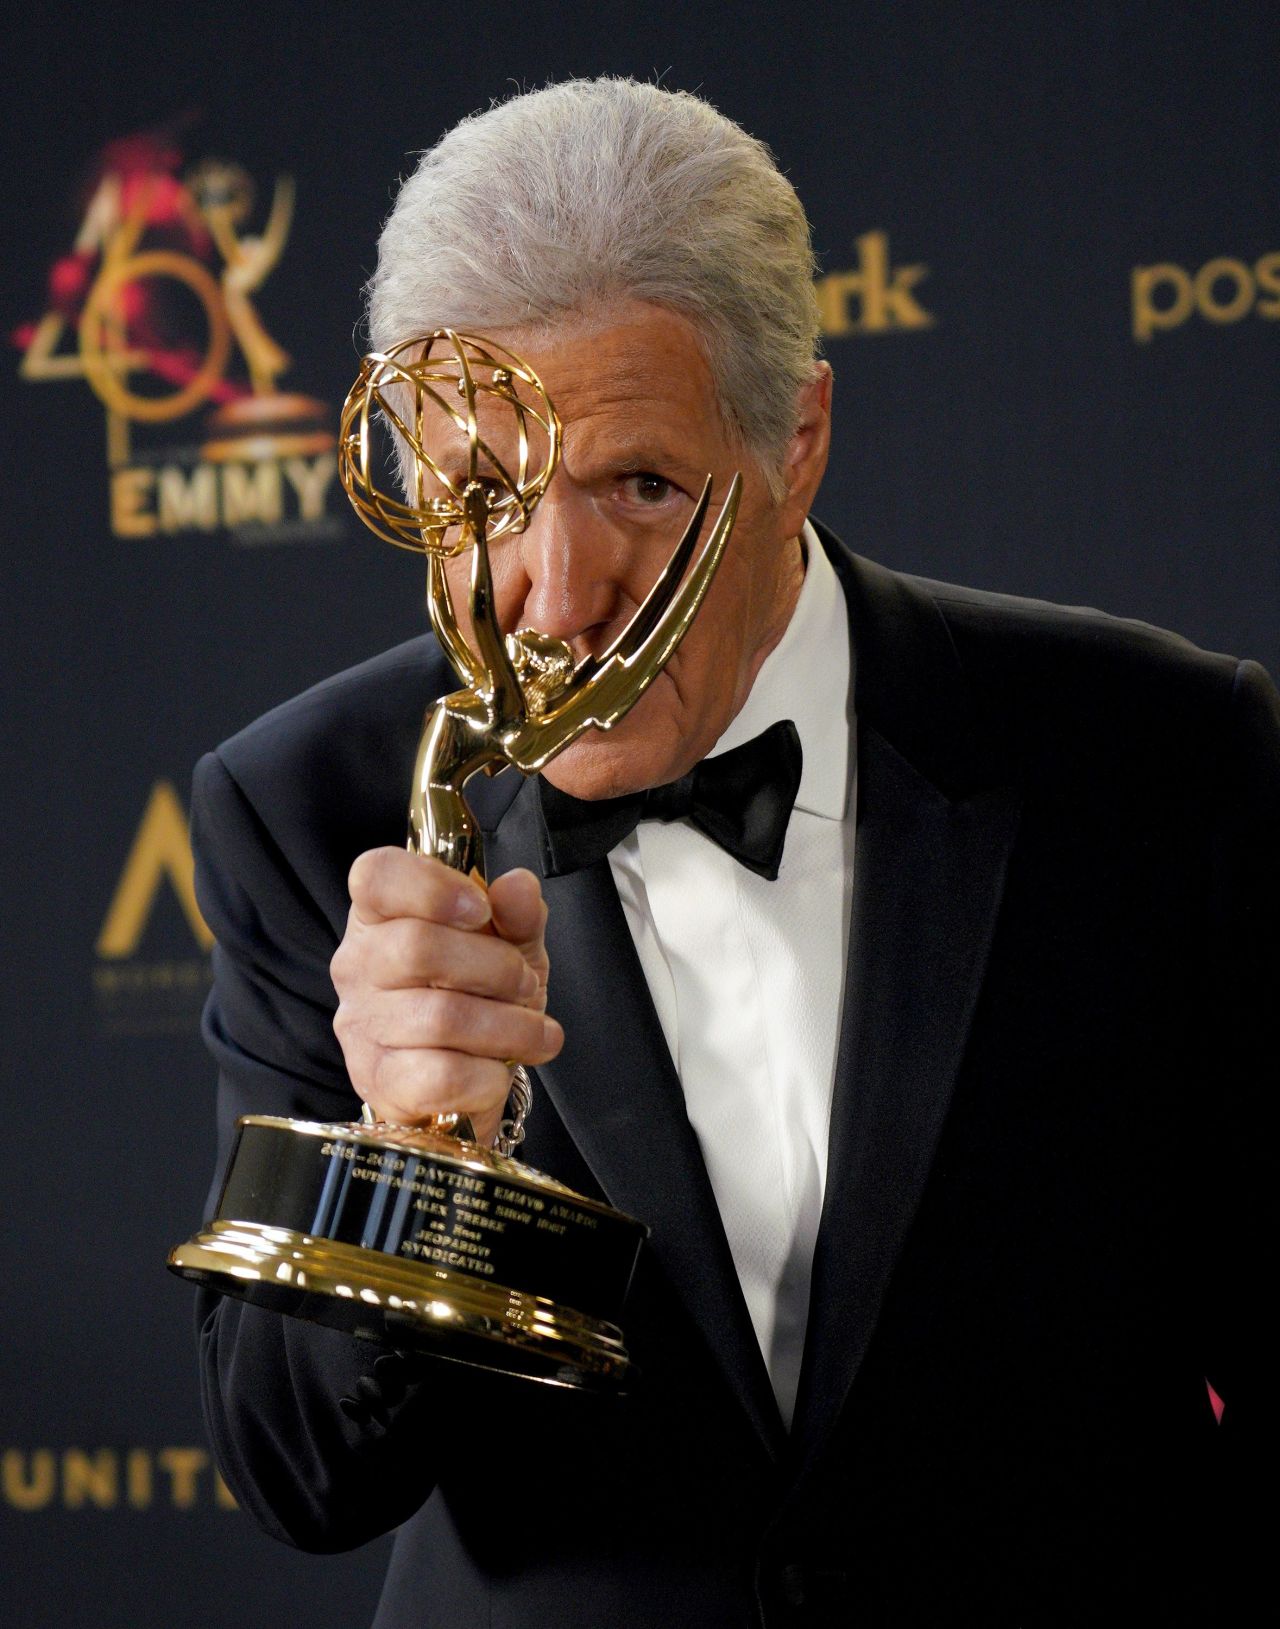 Trebek kisses his Emmy at the 46th Annual Daytime Emmy Awards show in Los Angeles on May 5, 2019.